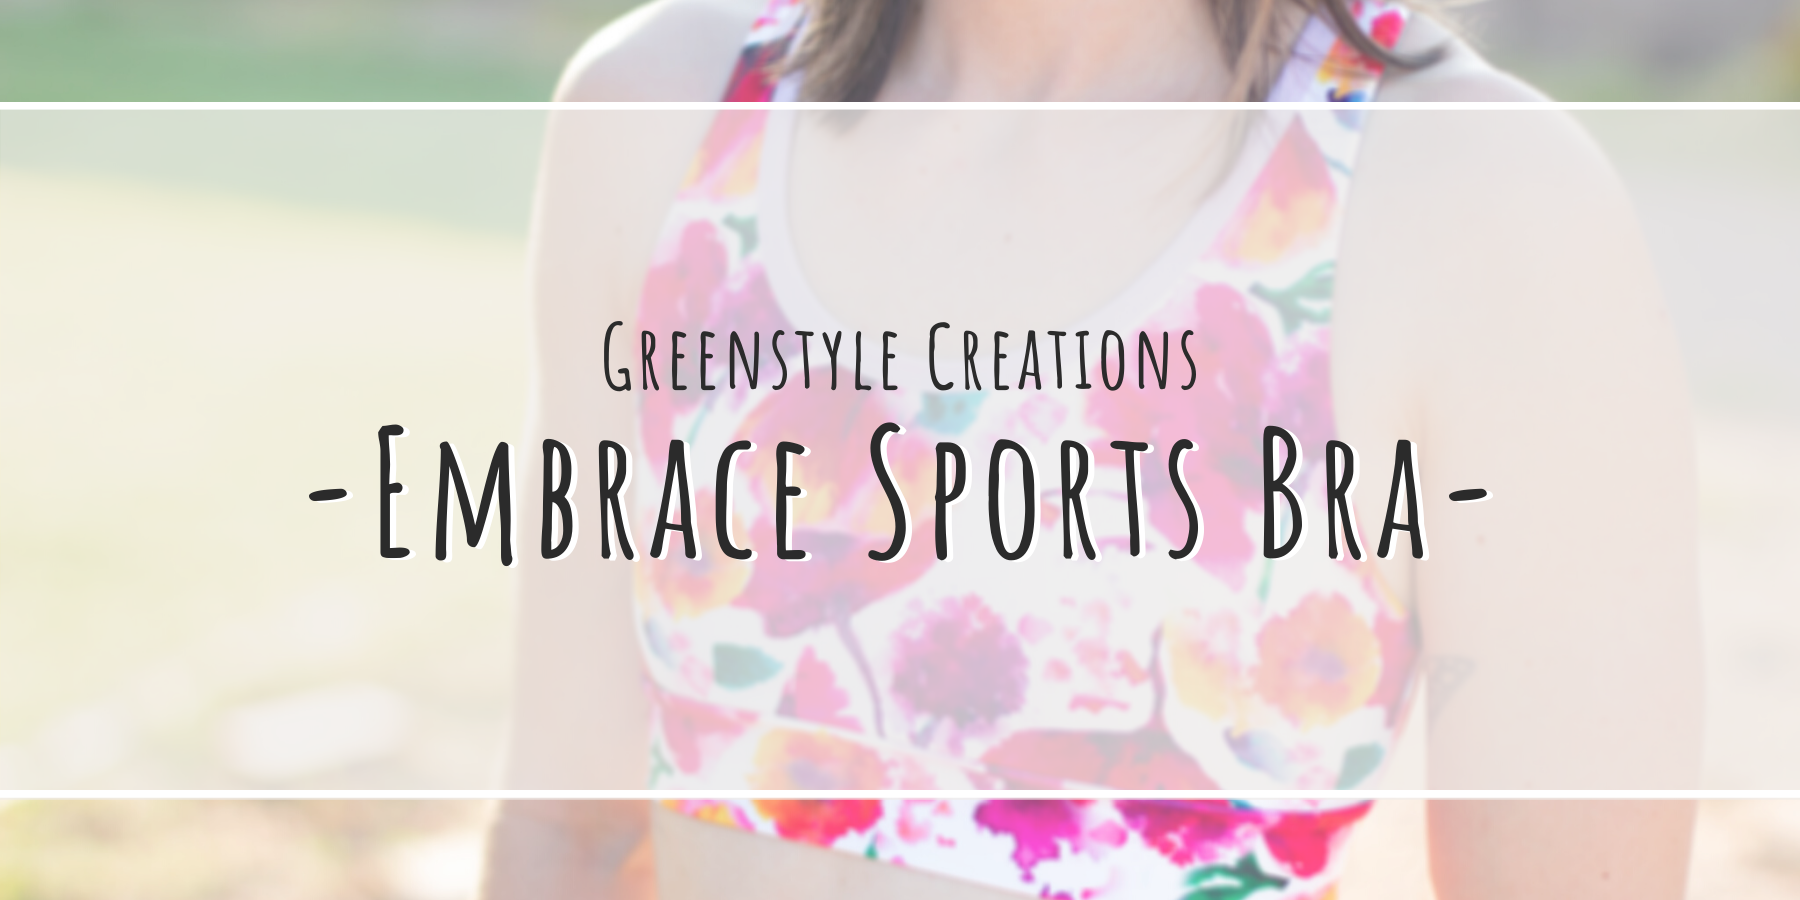 Greenstyle Creations - Embrace Sports Bra - sewingandthings